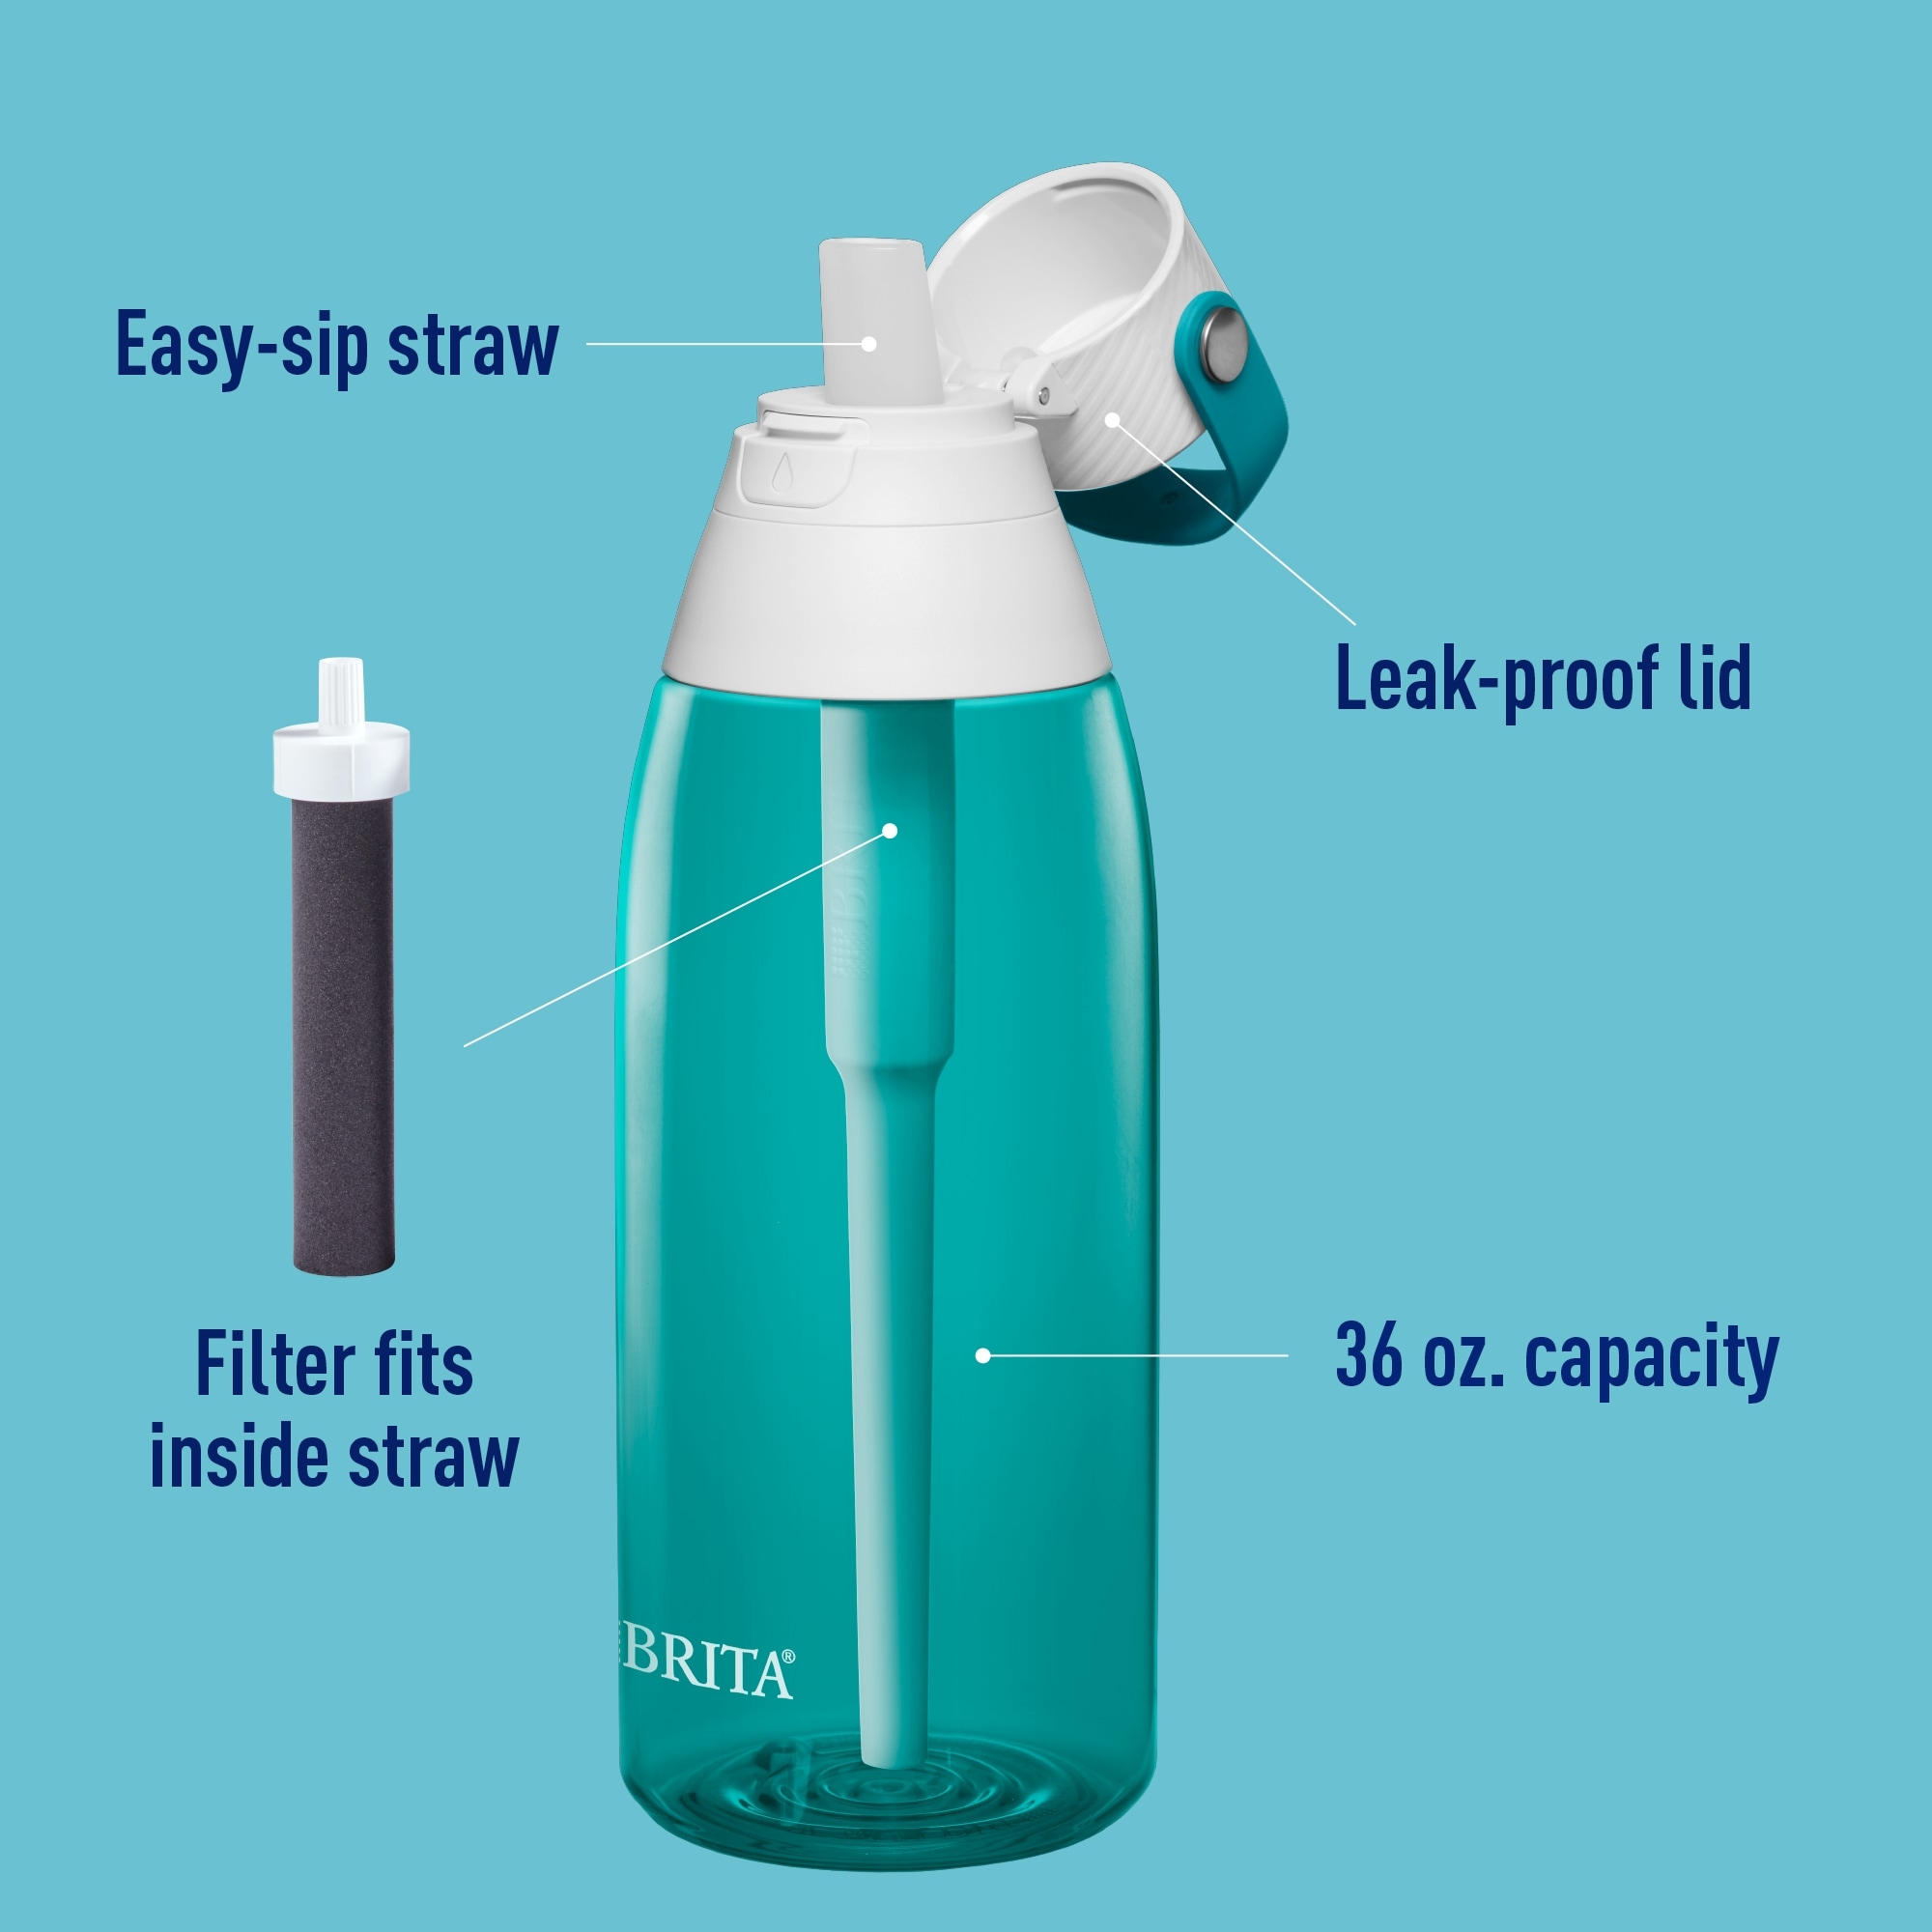 Brita Filtered Water Bottle Review 